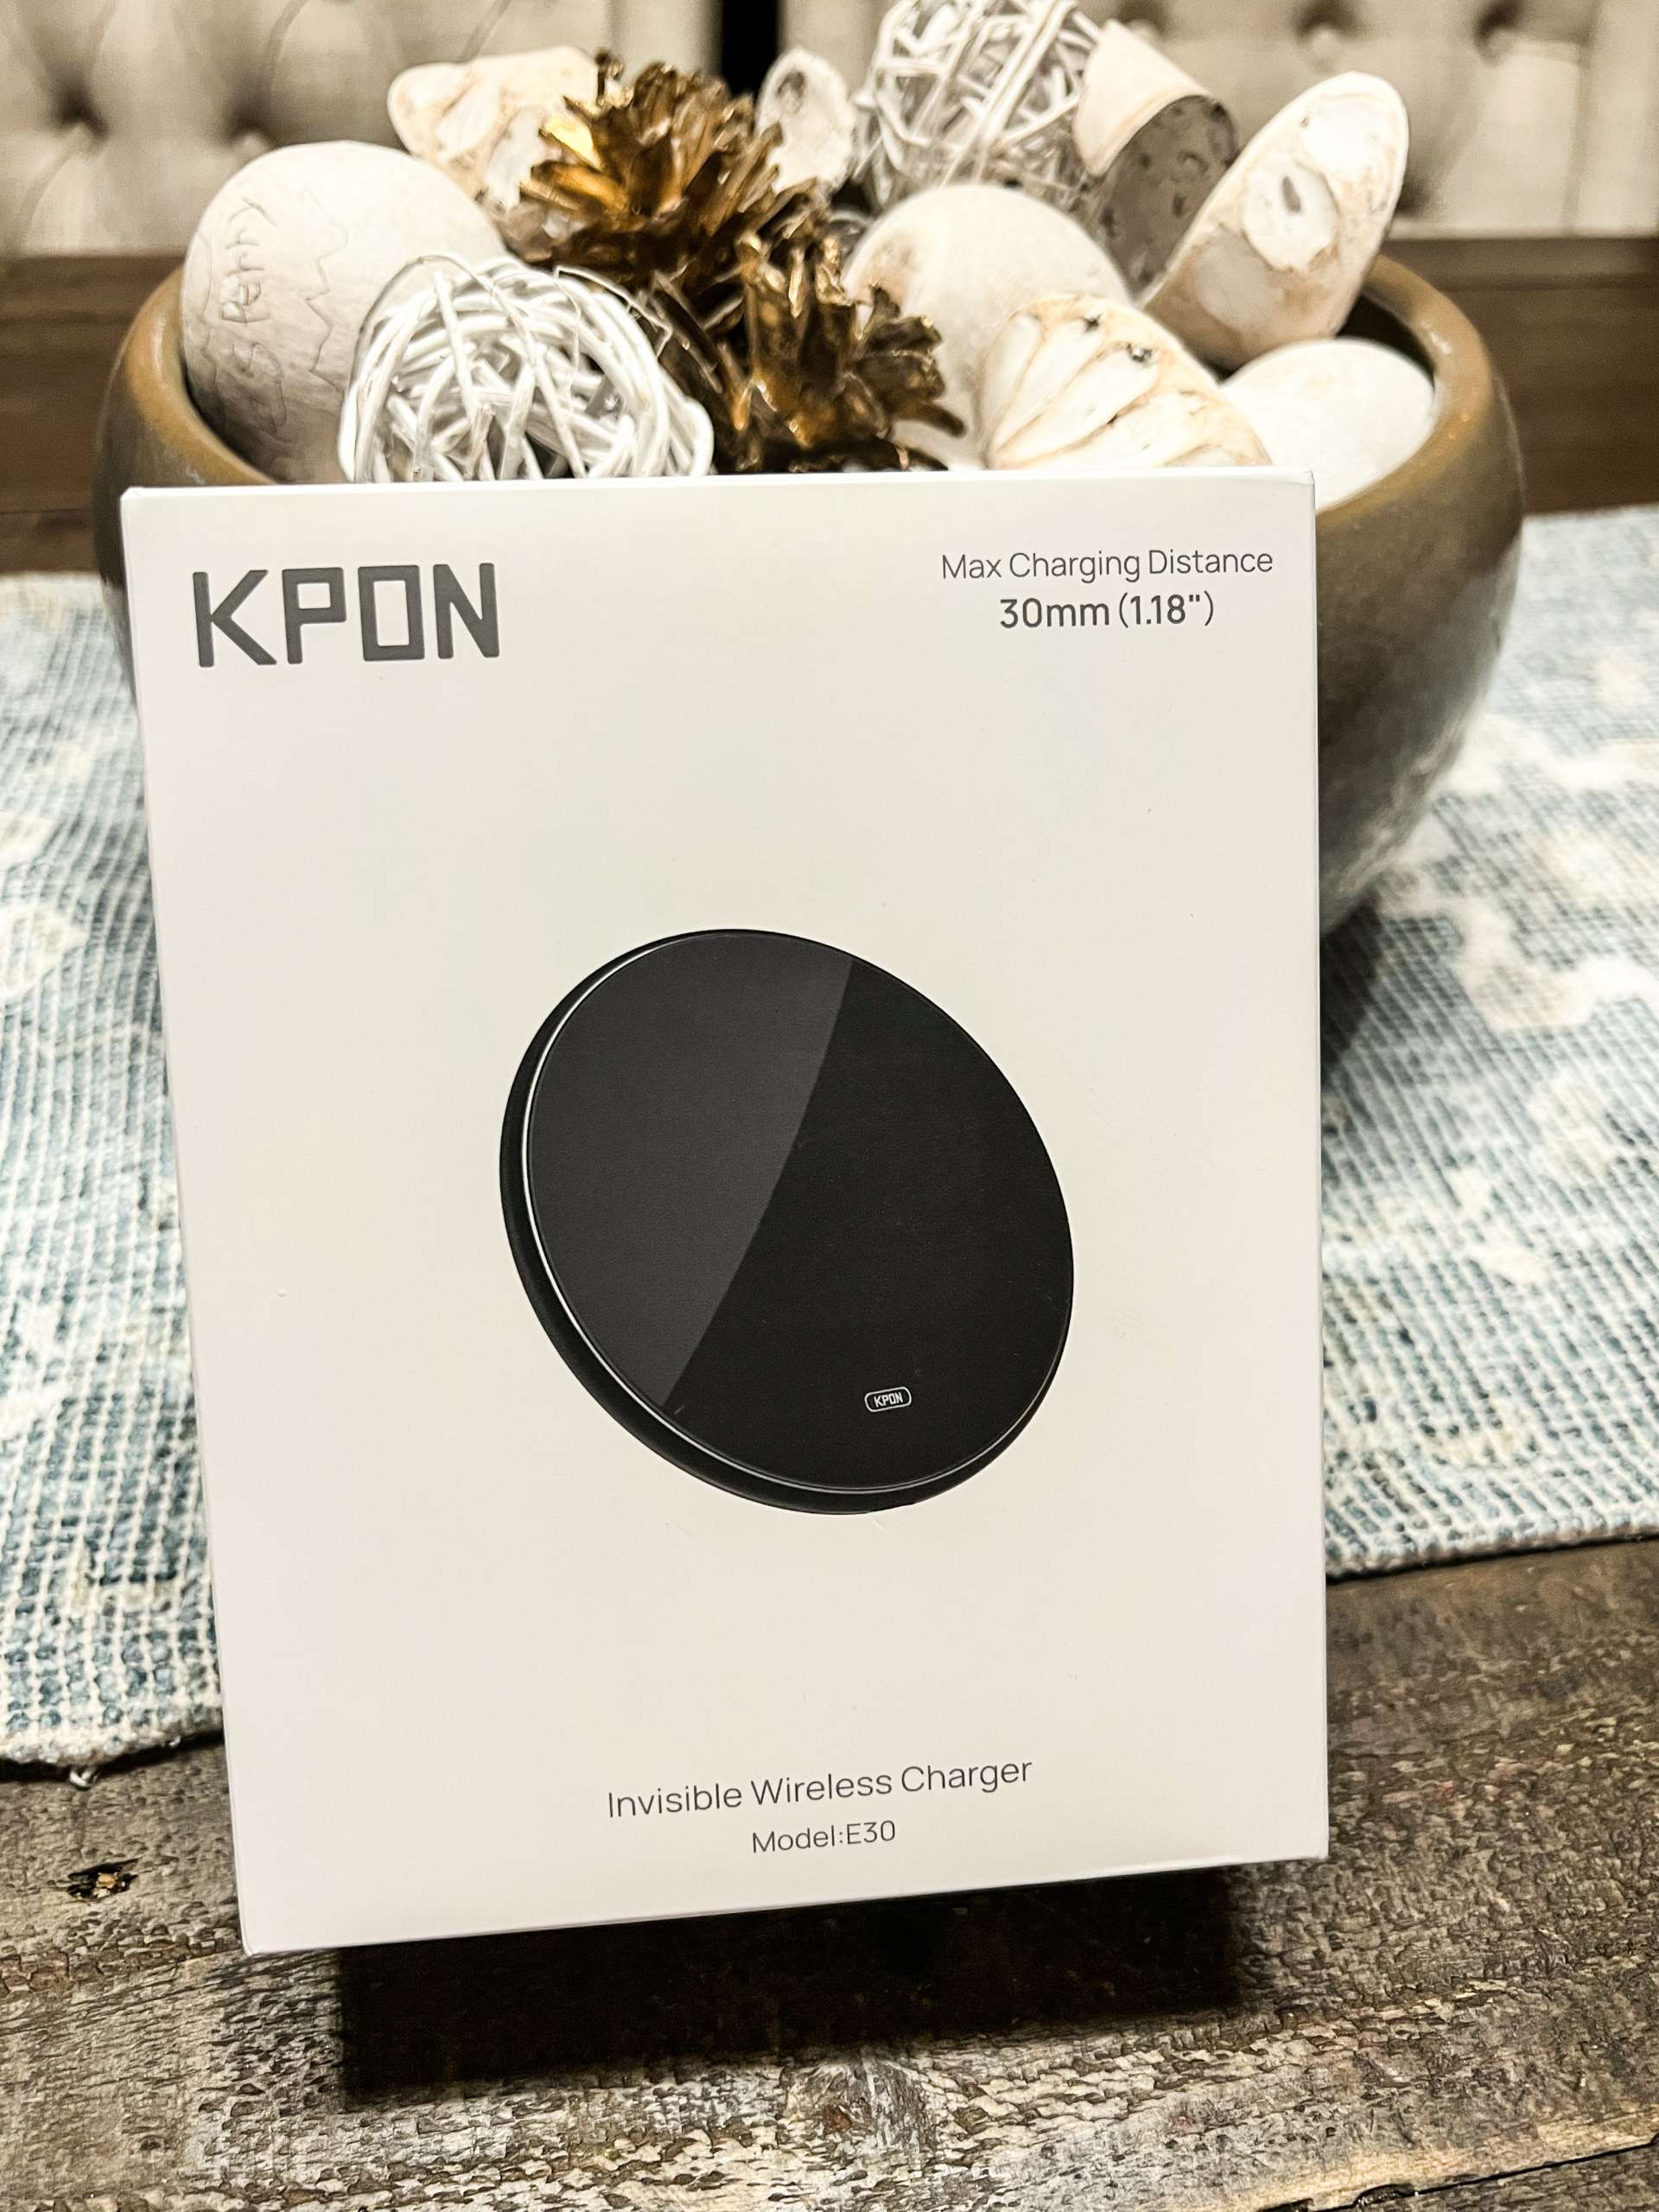 KPON Invisible Wireless Charger review - The Gadgeteer